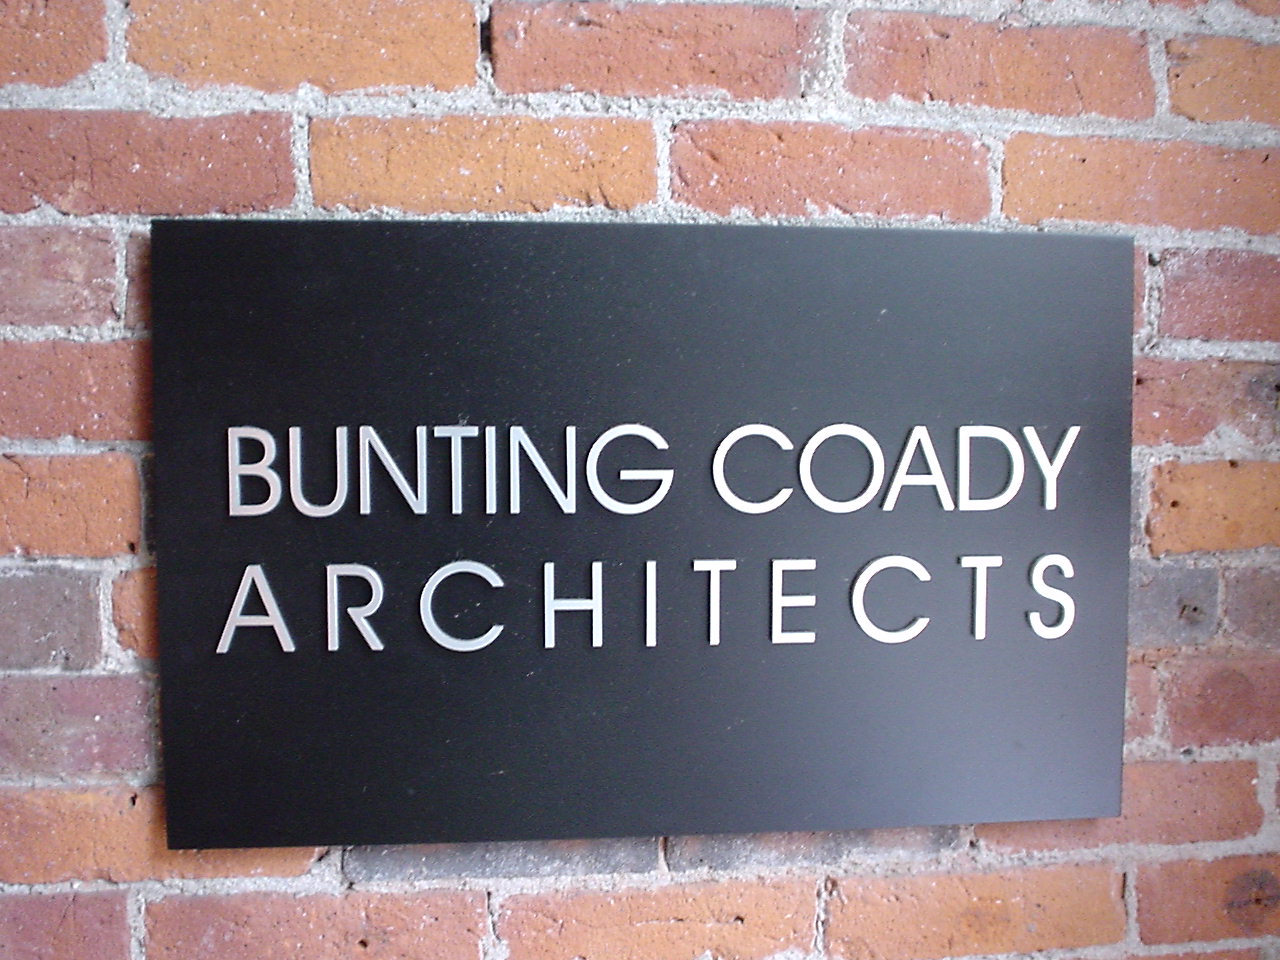 Bunting and Coady Architects